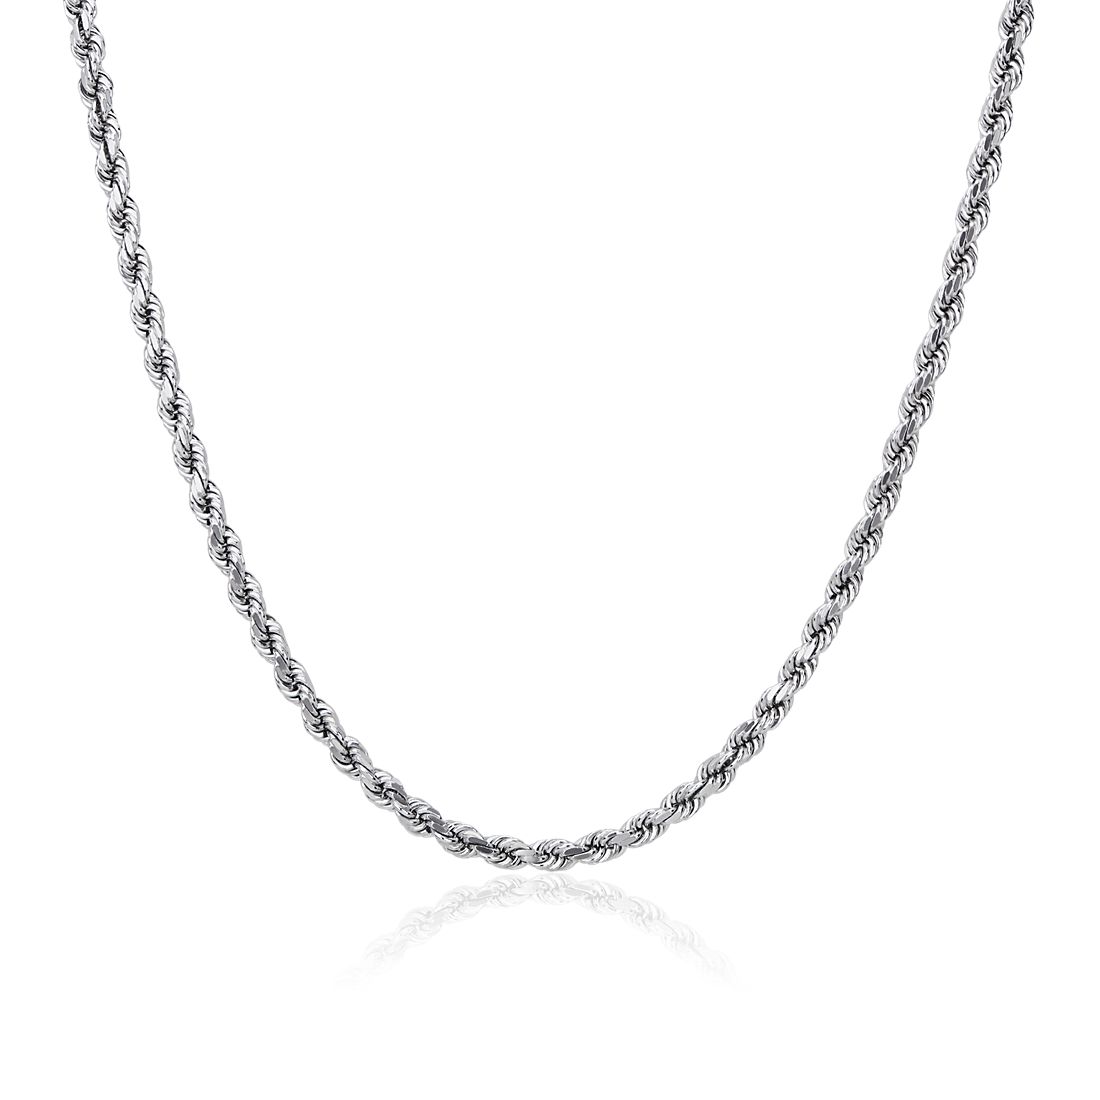 24" Men's Diamond Cut Rope Necklace in 14k White Gold (4.25 mm)